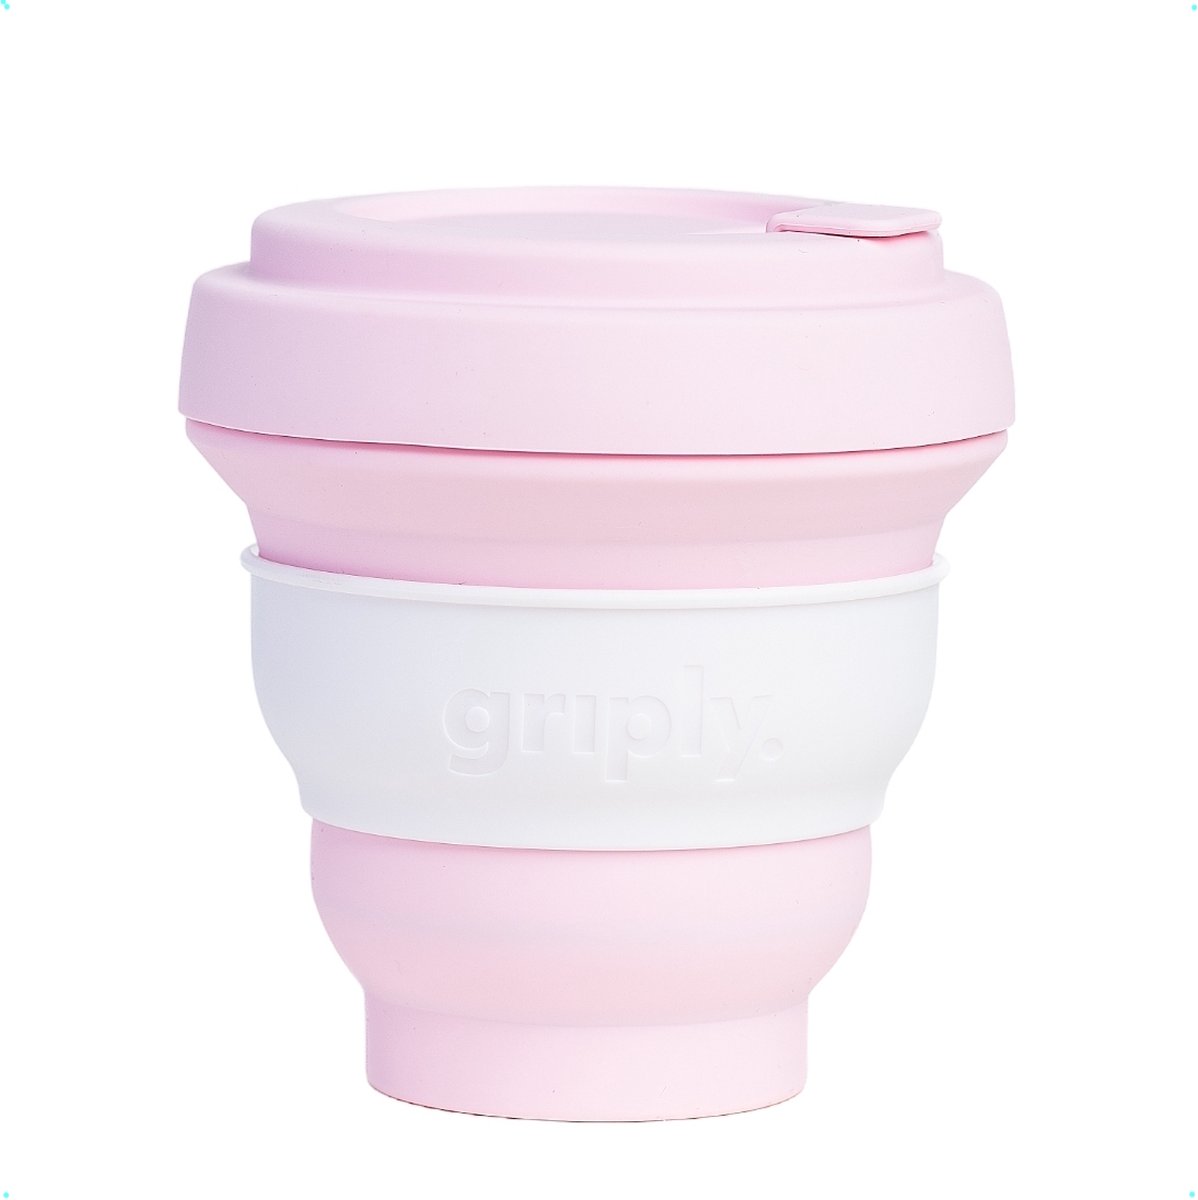 Griply to go - Opvouwbare koffiebeker met ring - 100% food grade siliconen - Festival Bloom - 355ml